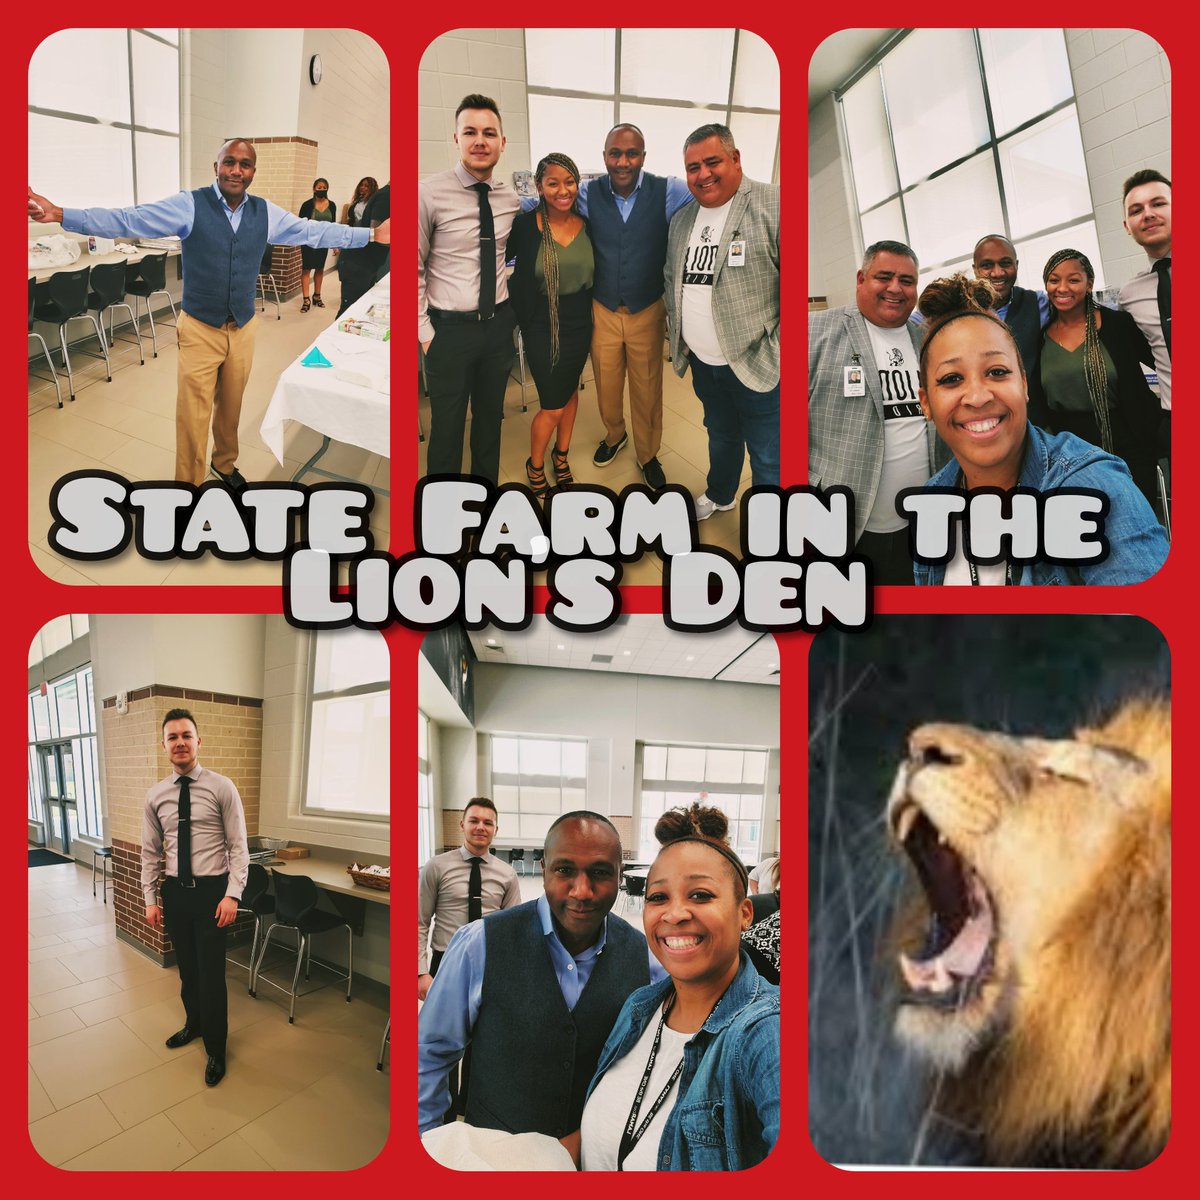 Thank you, Mr. Kevin Patton and your State Farm family for hanging out with us today! The lunch was amazing and we are truly thankful.

#TheRandleExperience
#WorkingLunch